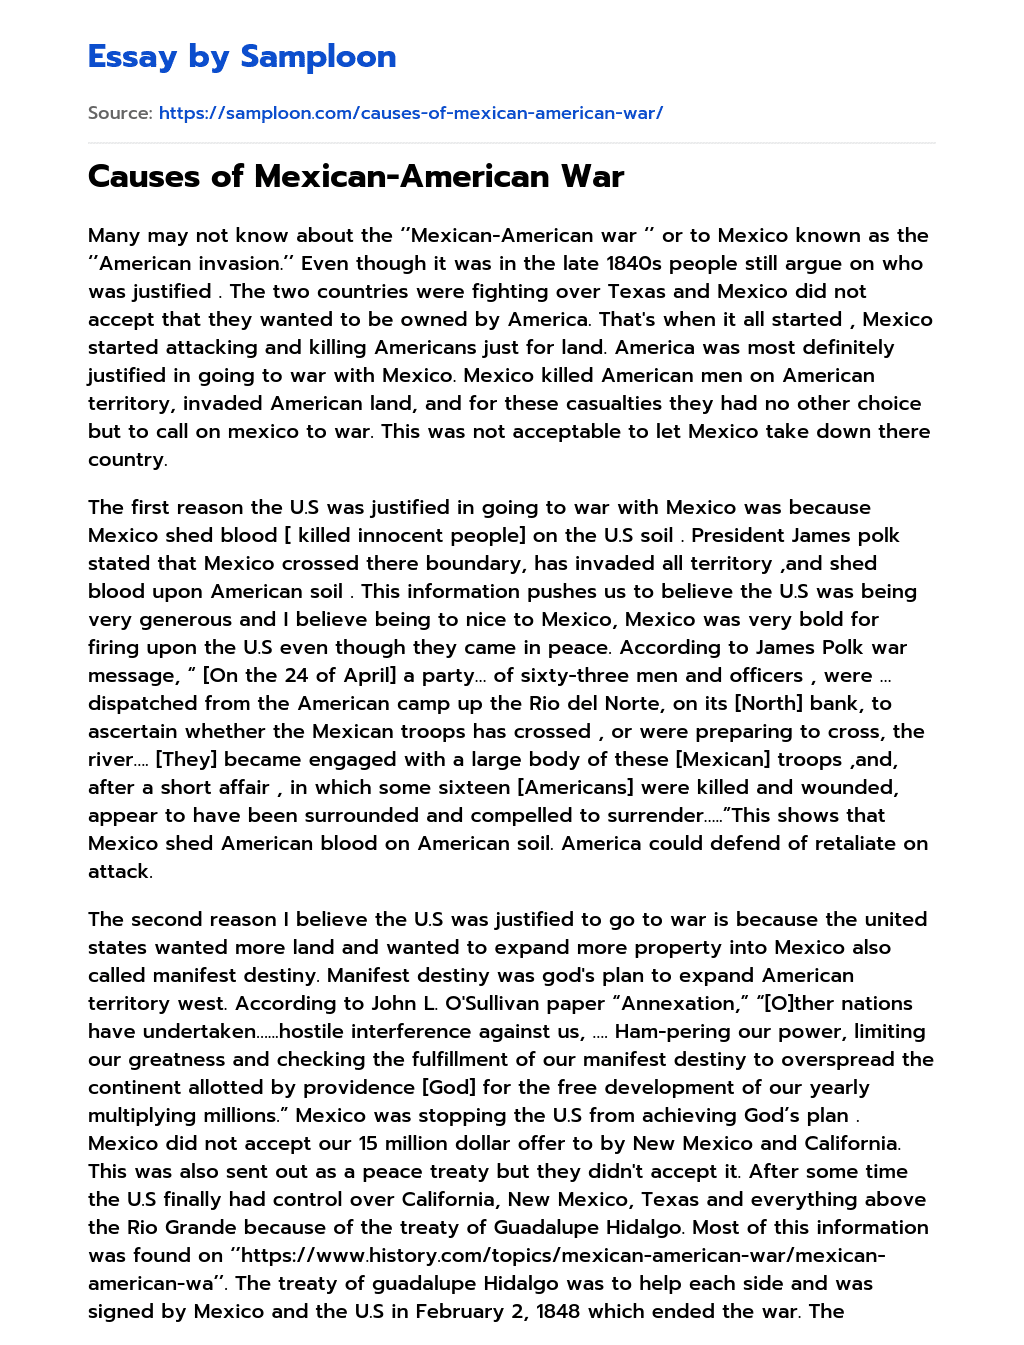 Causes of Mexican-American War essay